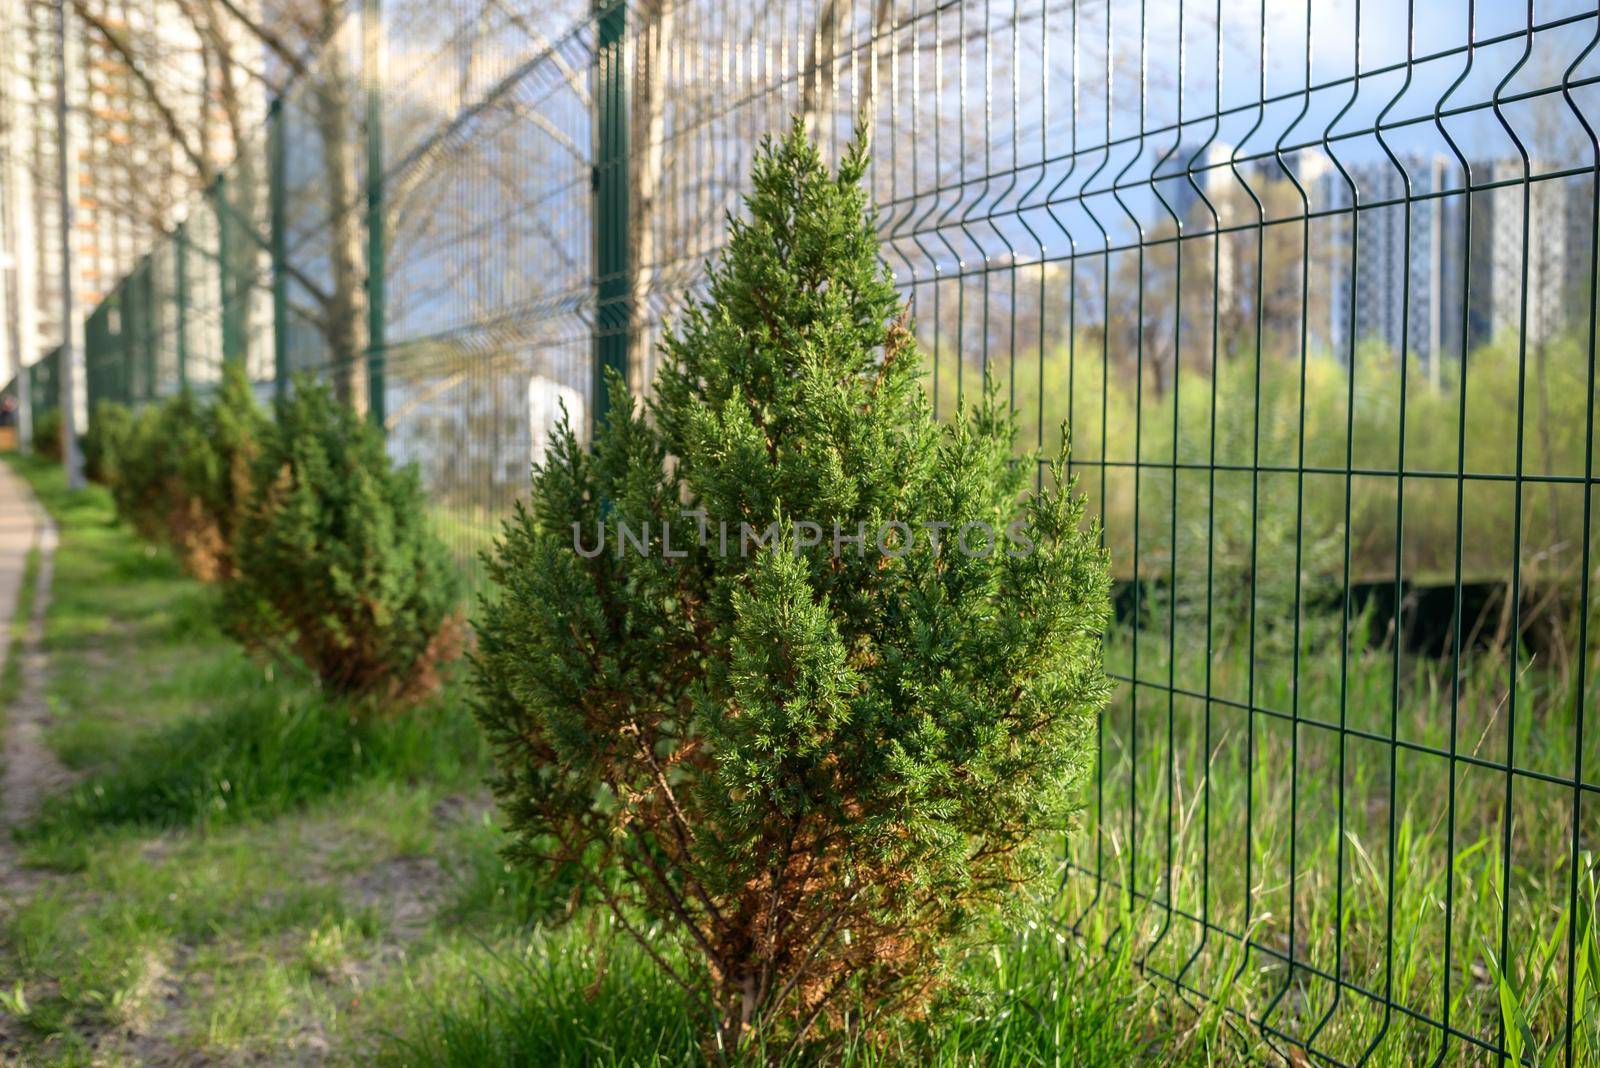 Skyrocket Junipers hedges as house green fence from street side.